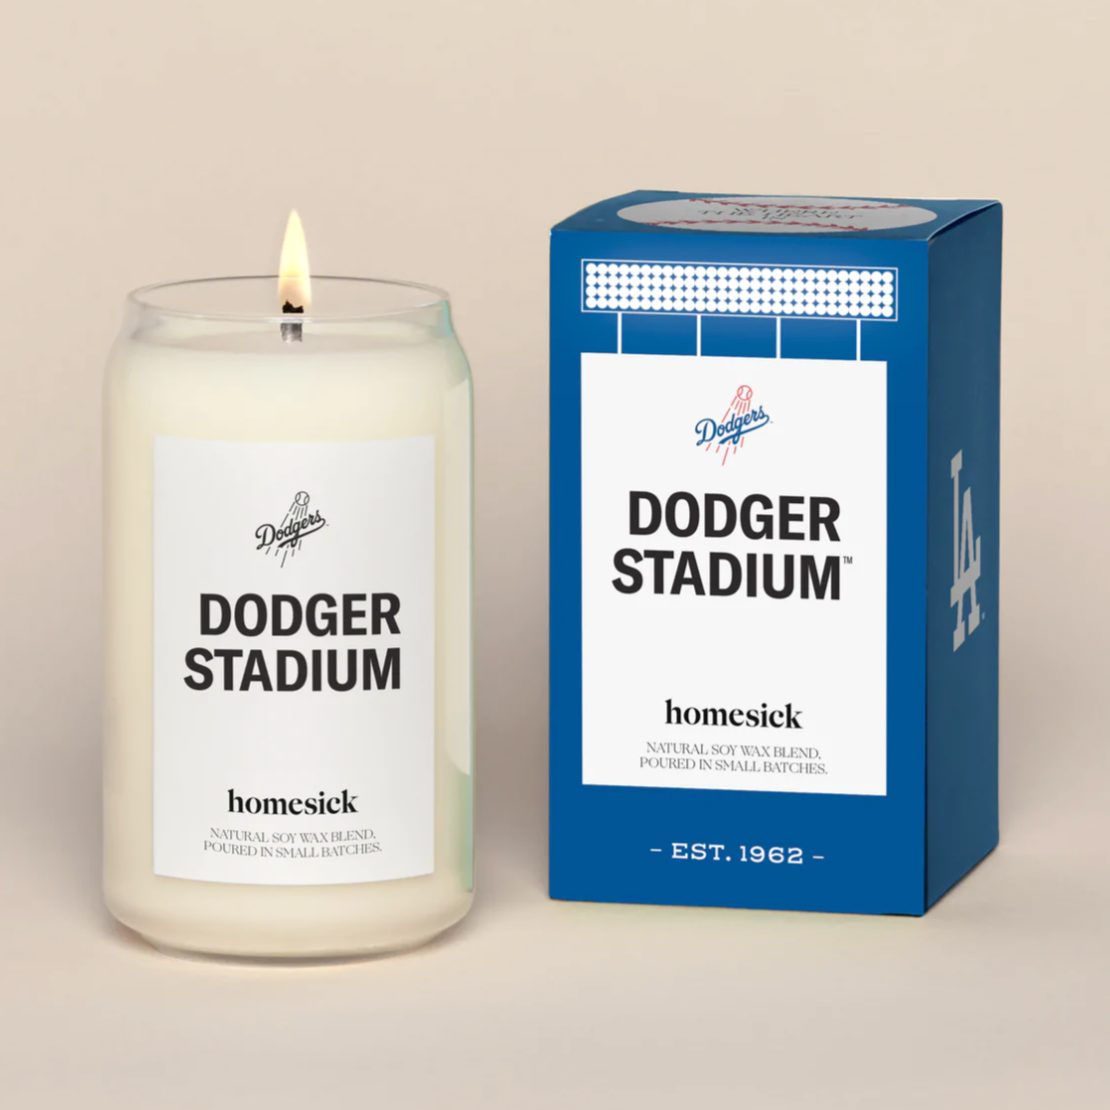 Dodger stadium glass candle with blue box on side